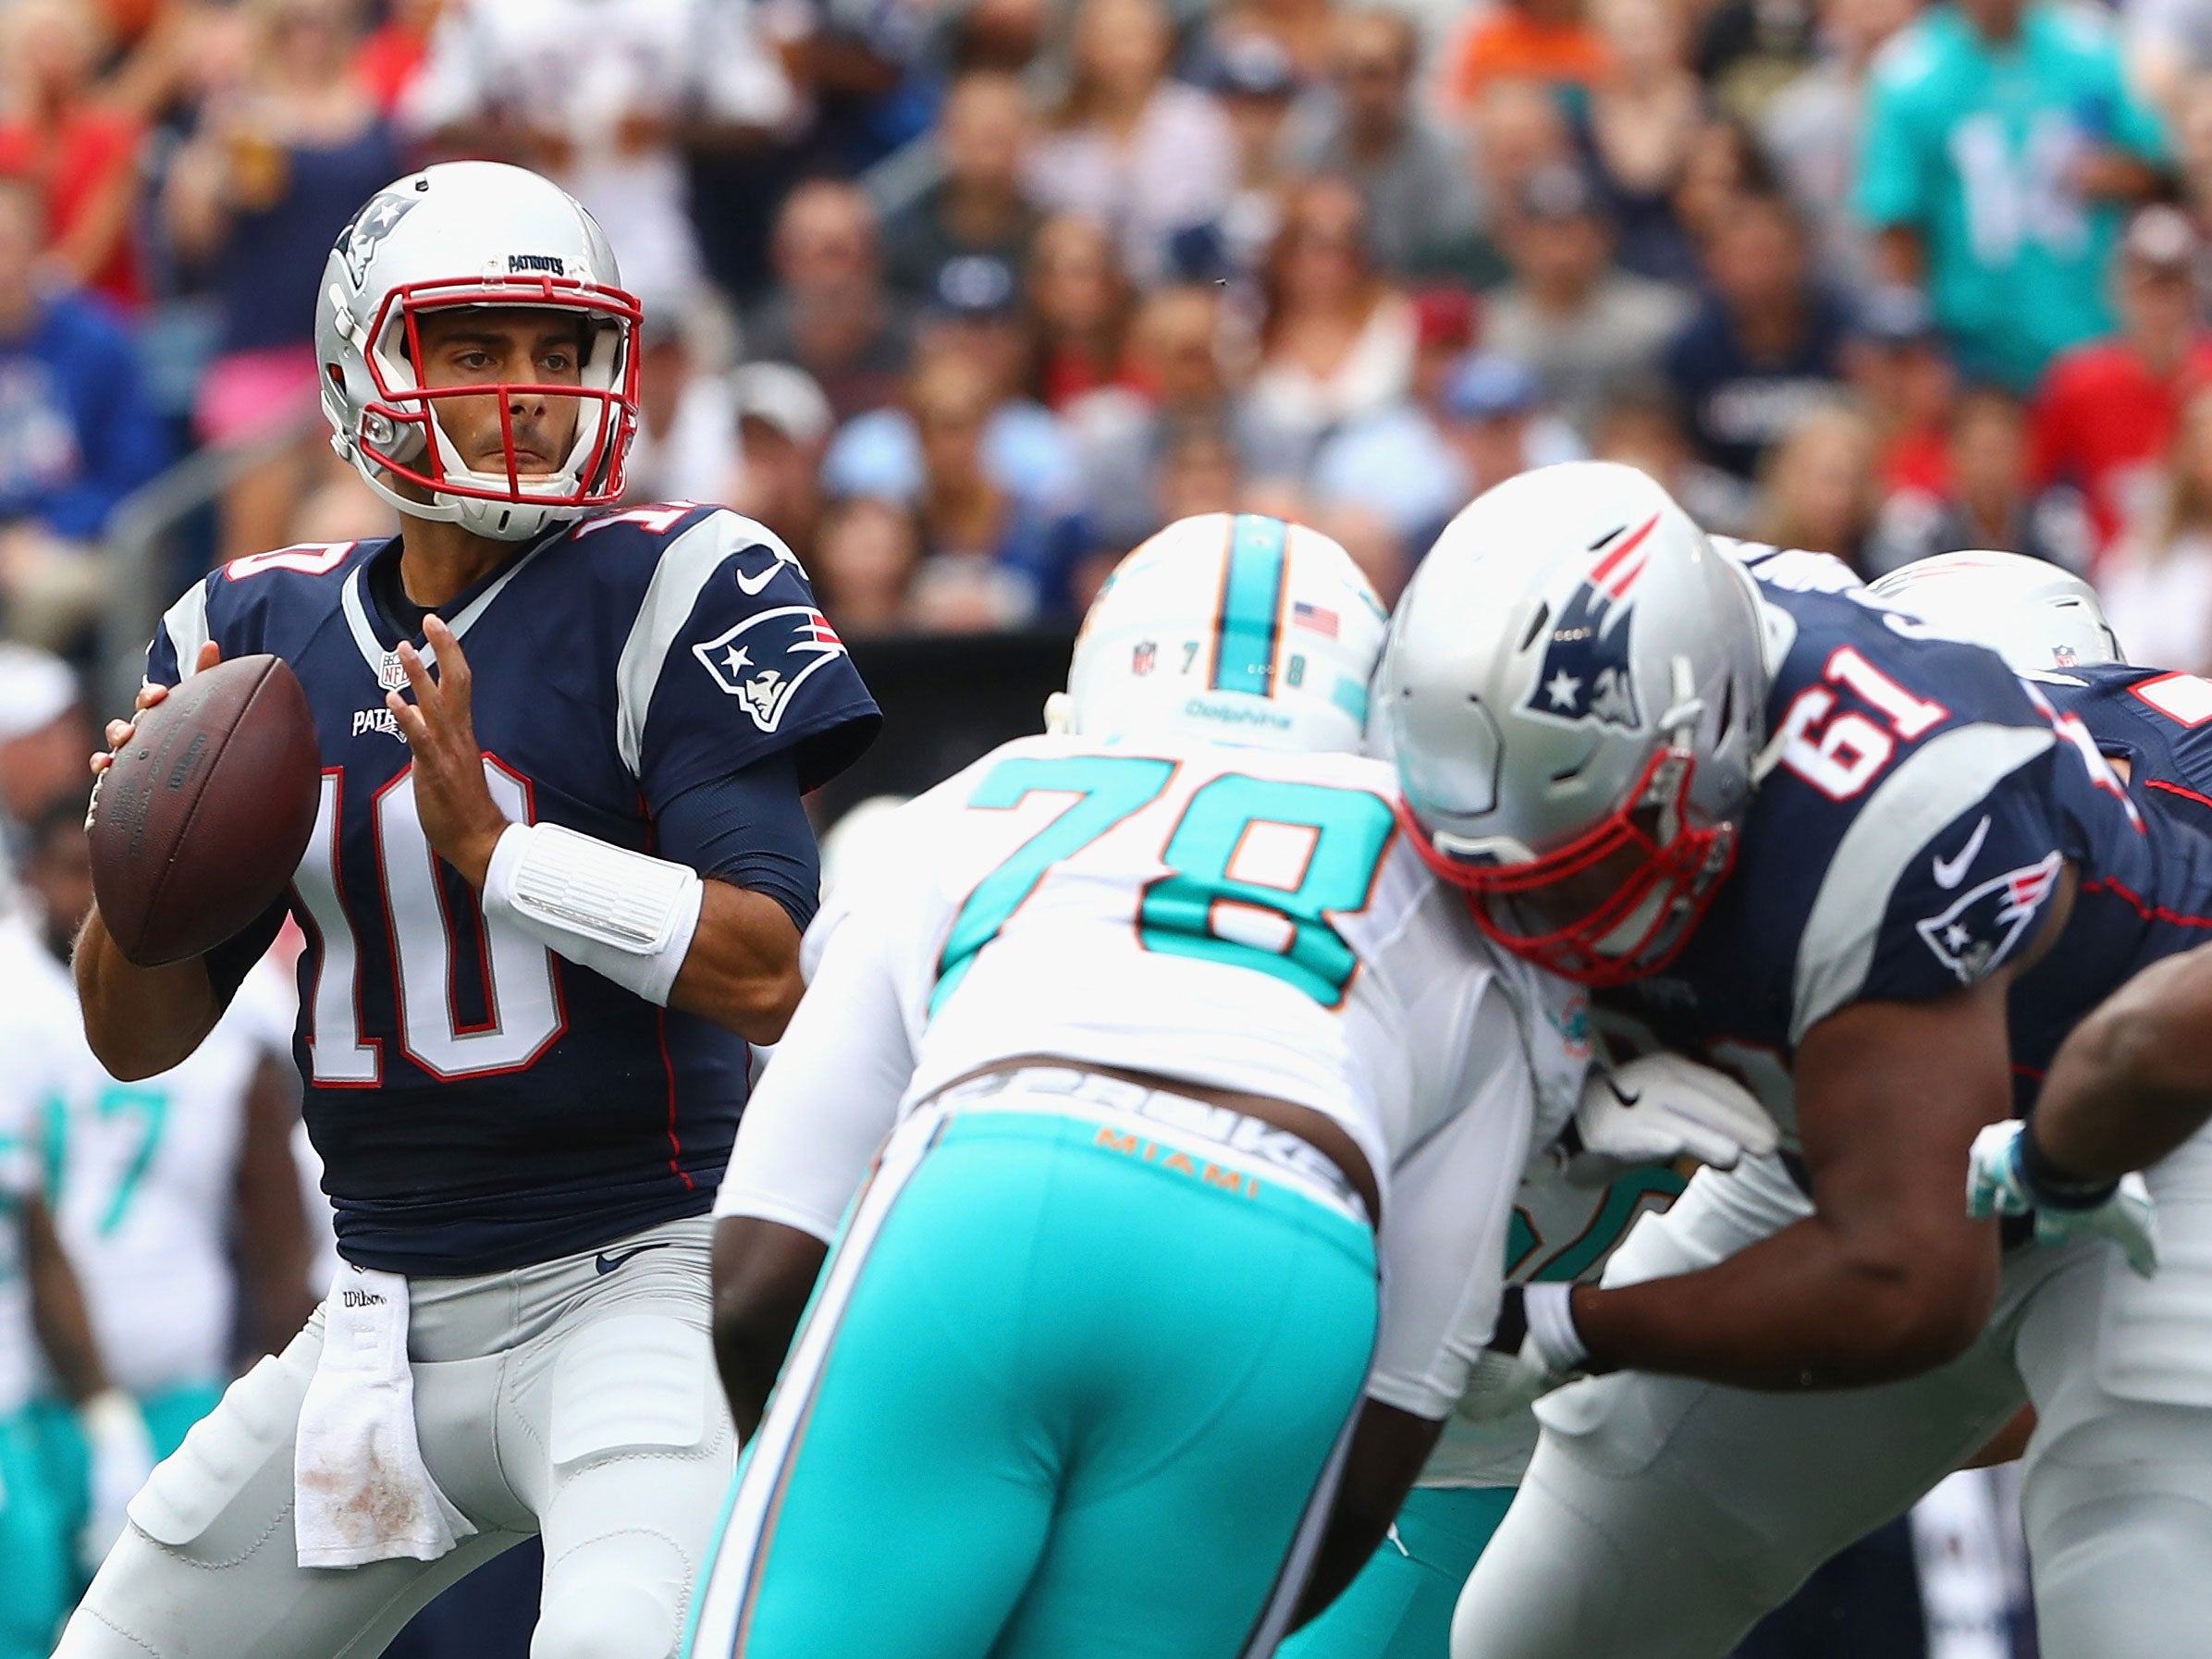 Jimmy Garoppolo started two games, winning both, for the Patriots in 2016